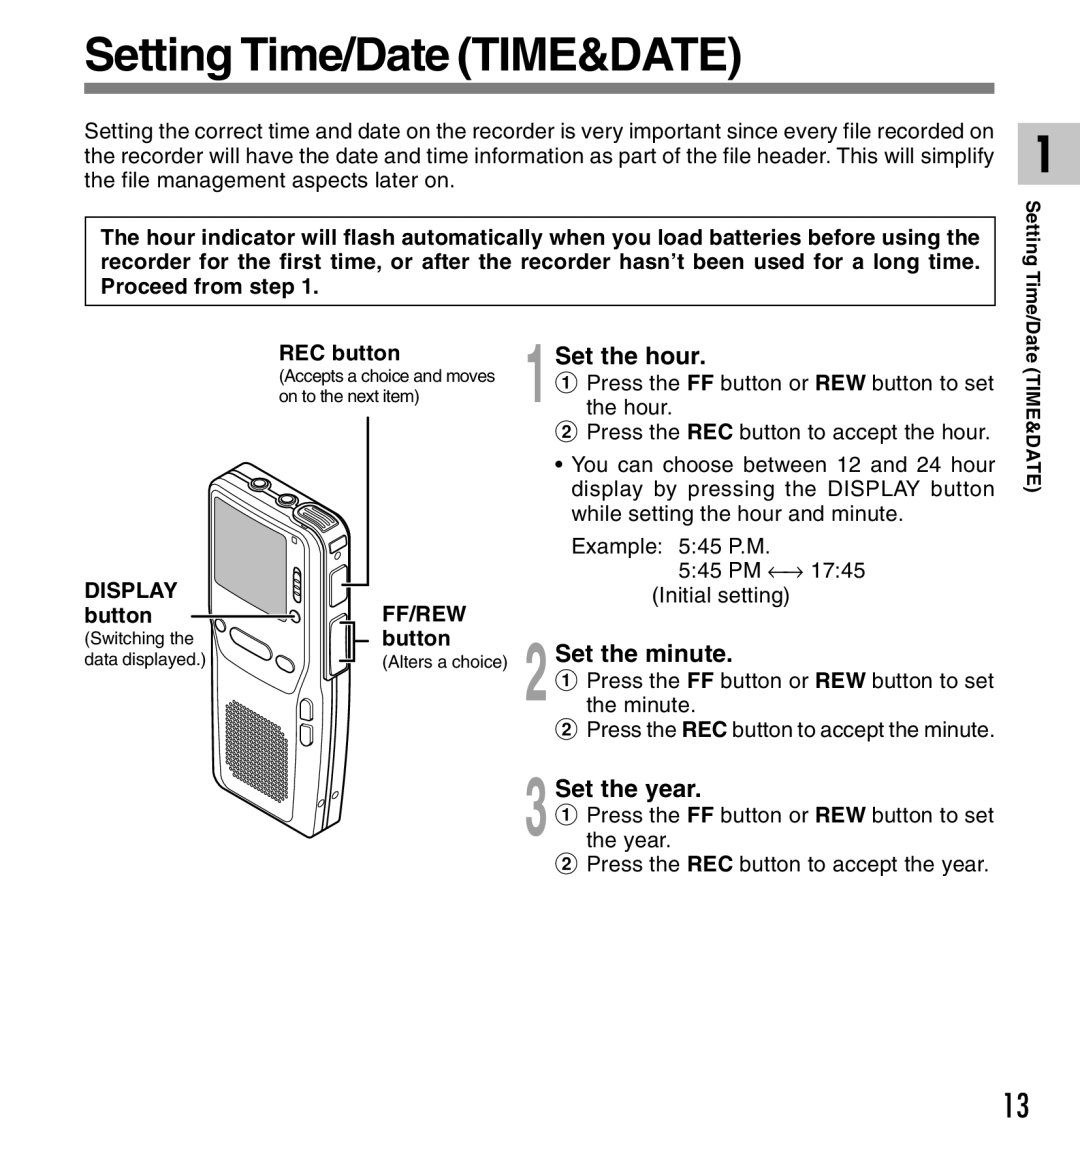 Olympus DS-2300 manual Setting Time/Date TIME&DATE, 1Set the hour, 2Set the minute, 3Set the year 